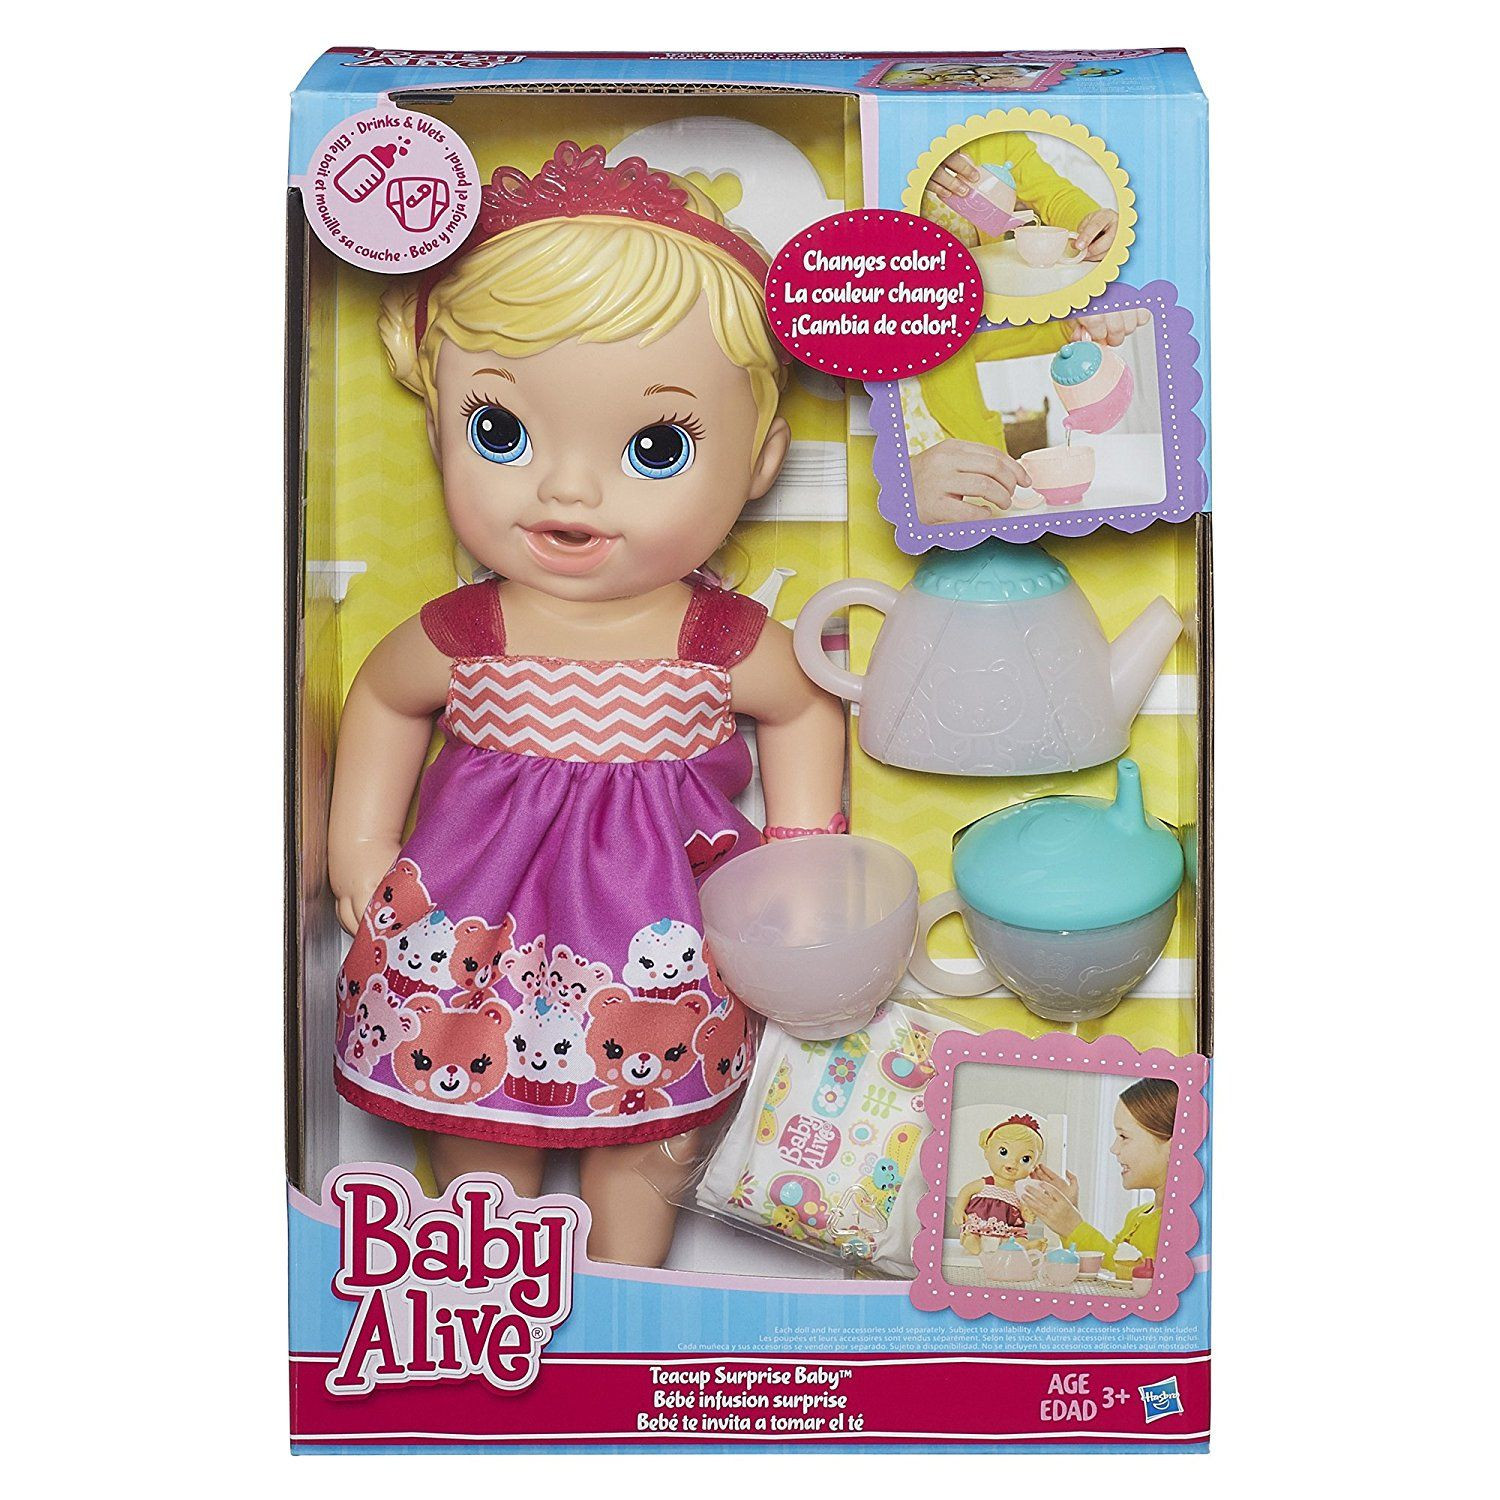 Baby Alive Tea Party Doll
 Baby Alive Lil Sips Baby Has a Tea Party Doll Blonde